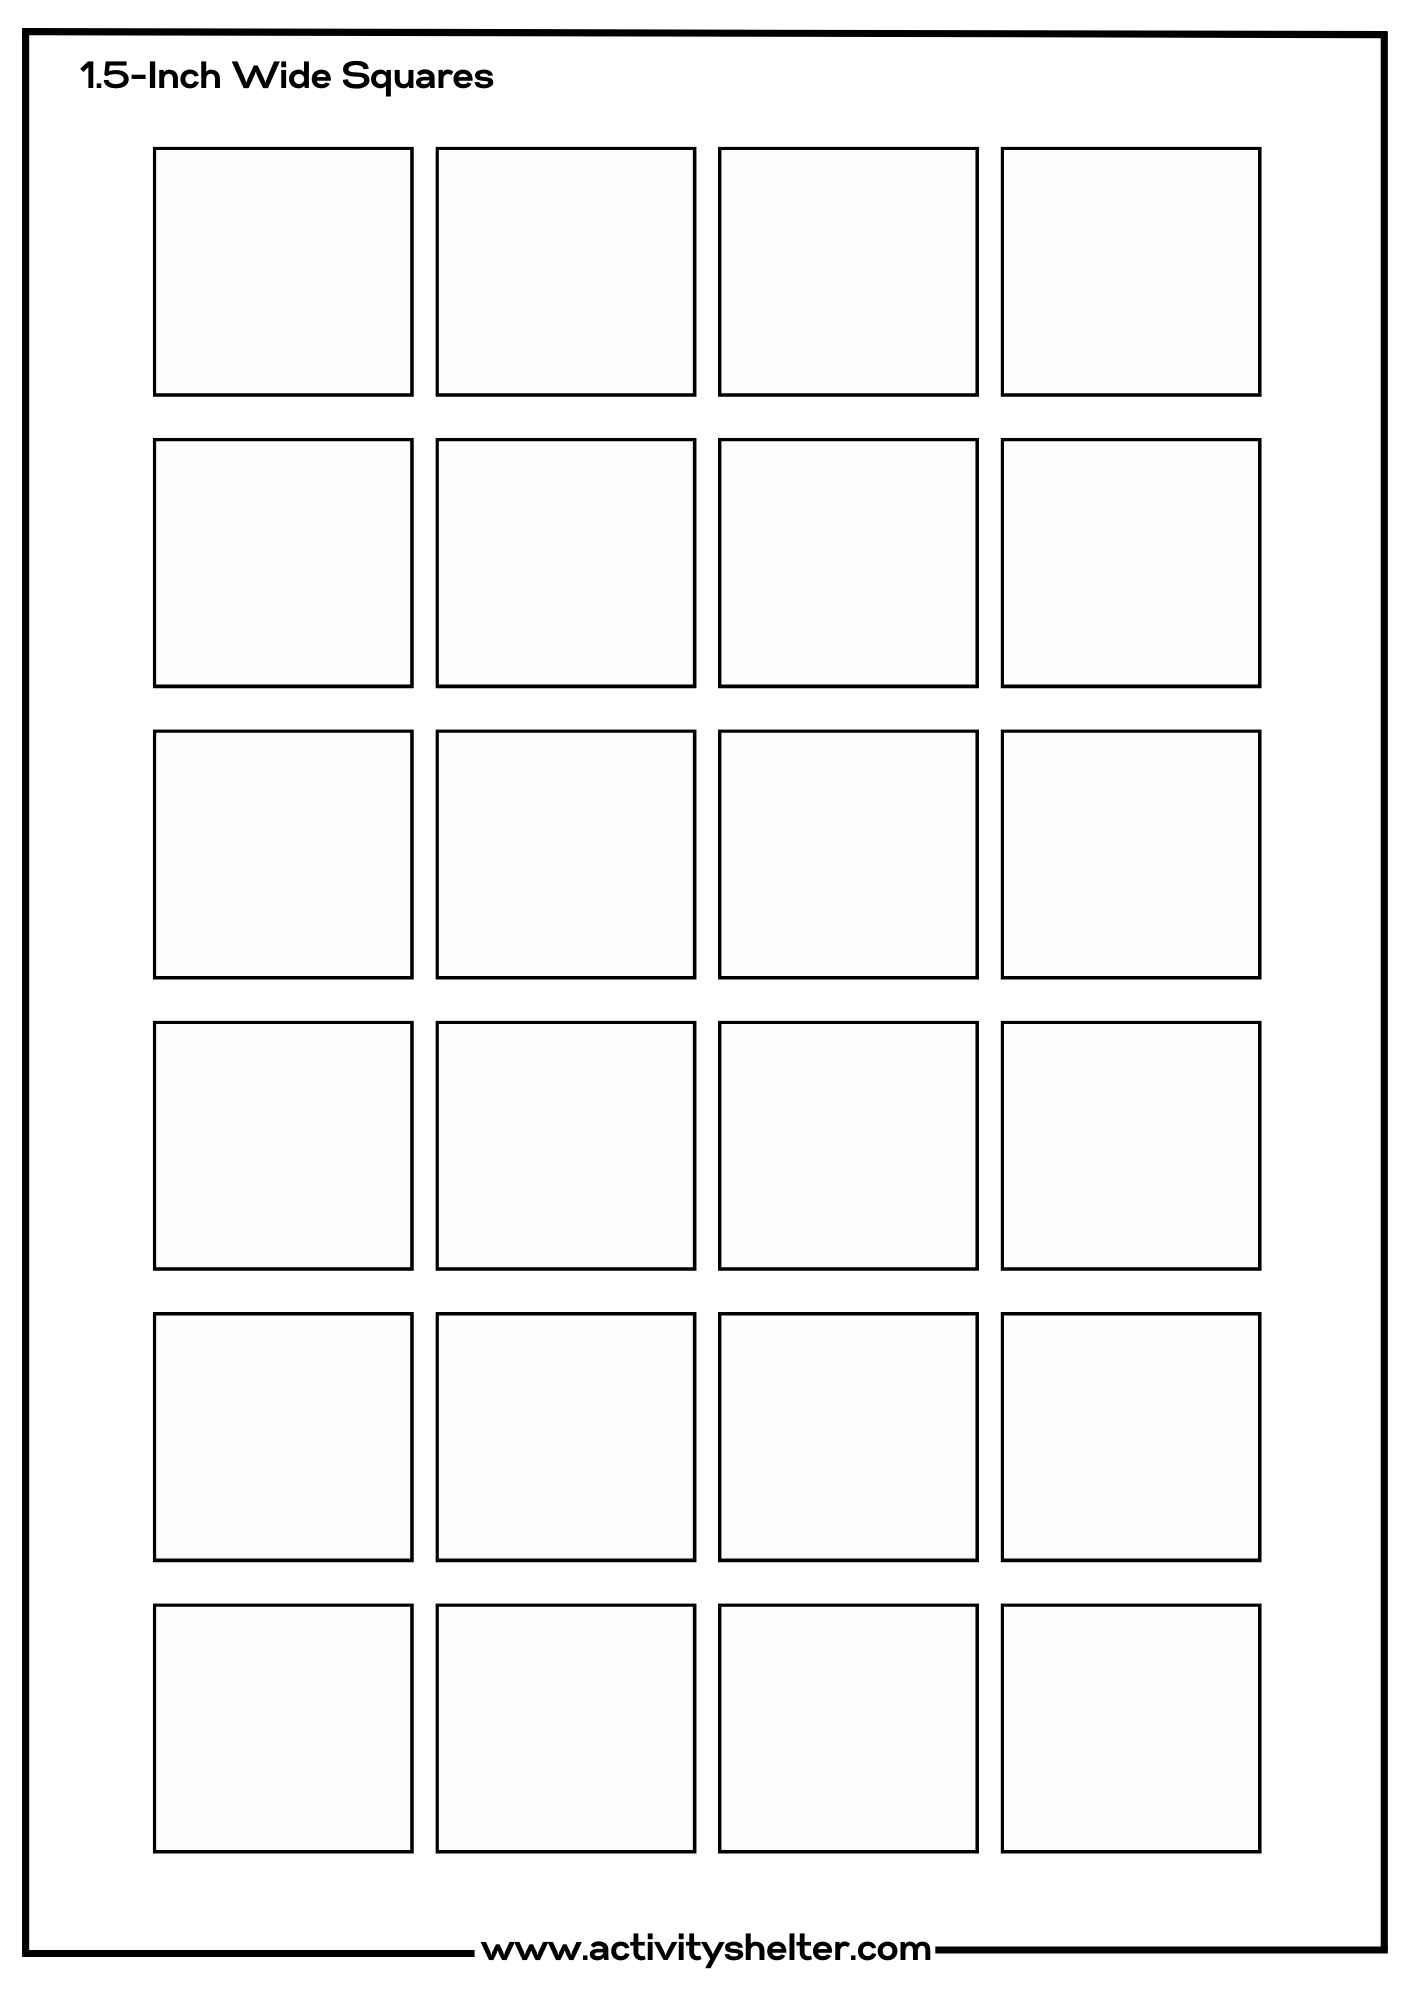 Printable Square 1.5-Inch Wide